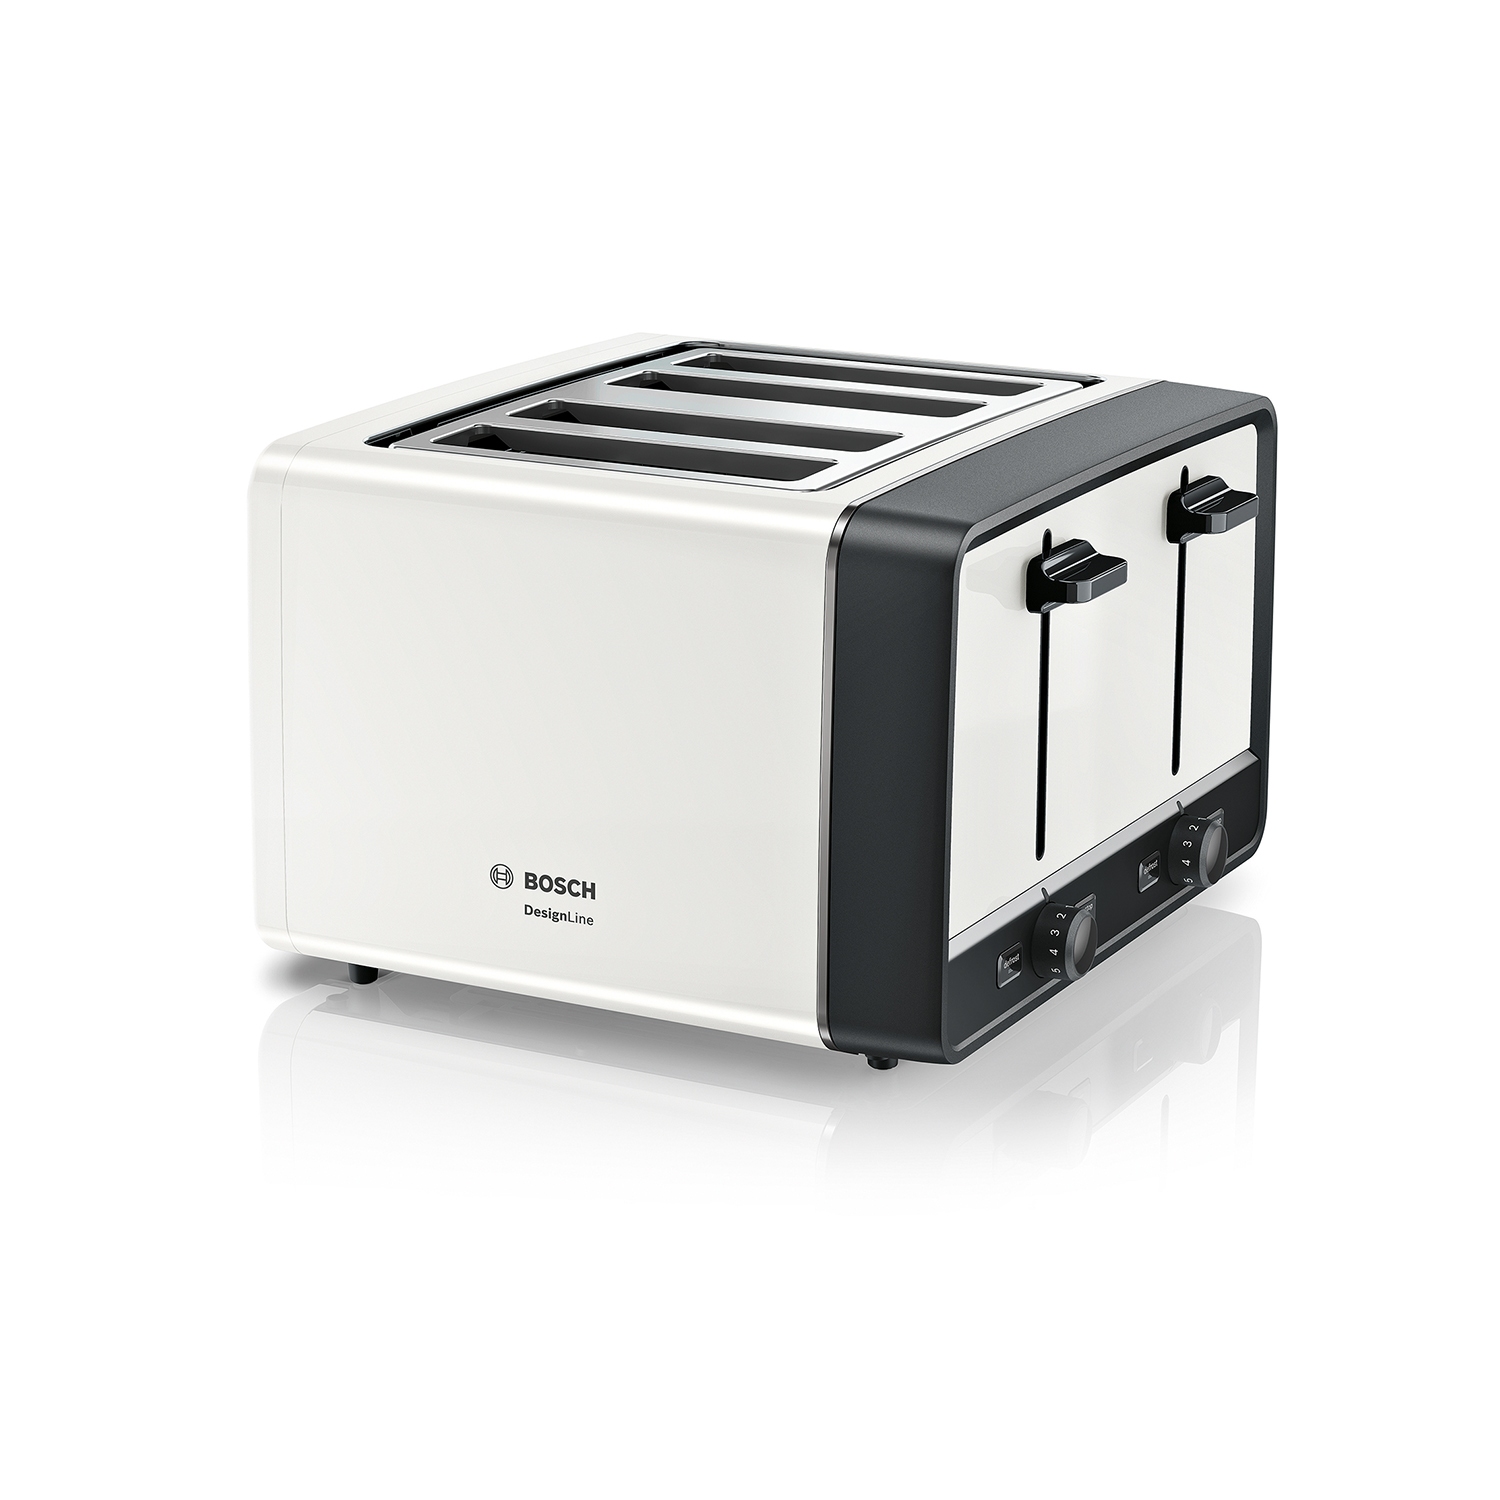 Bosch TAT5P441GB 4 Slice Toaster - White' Energy Efficient Toasters with Free 2 year Warranty - 0